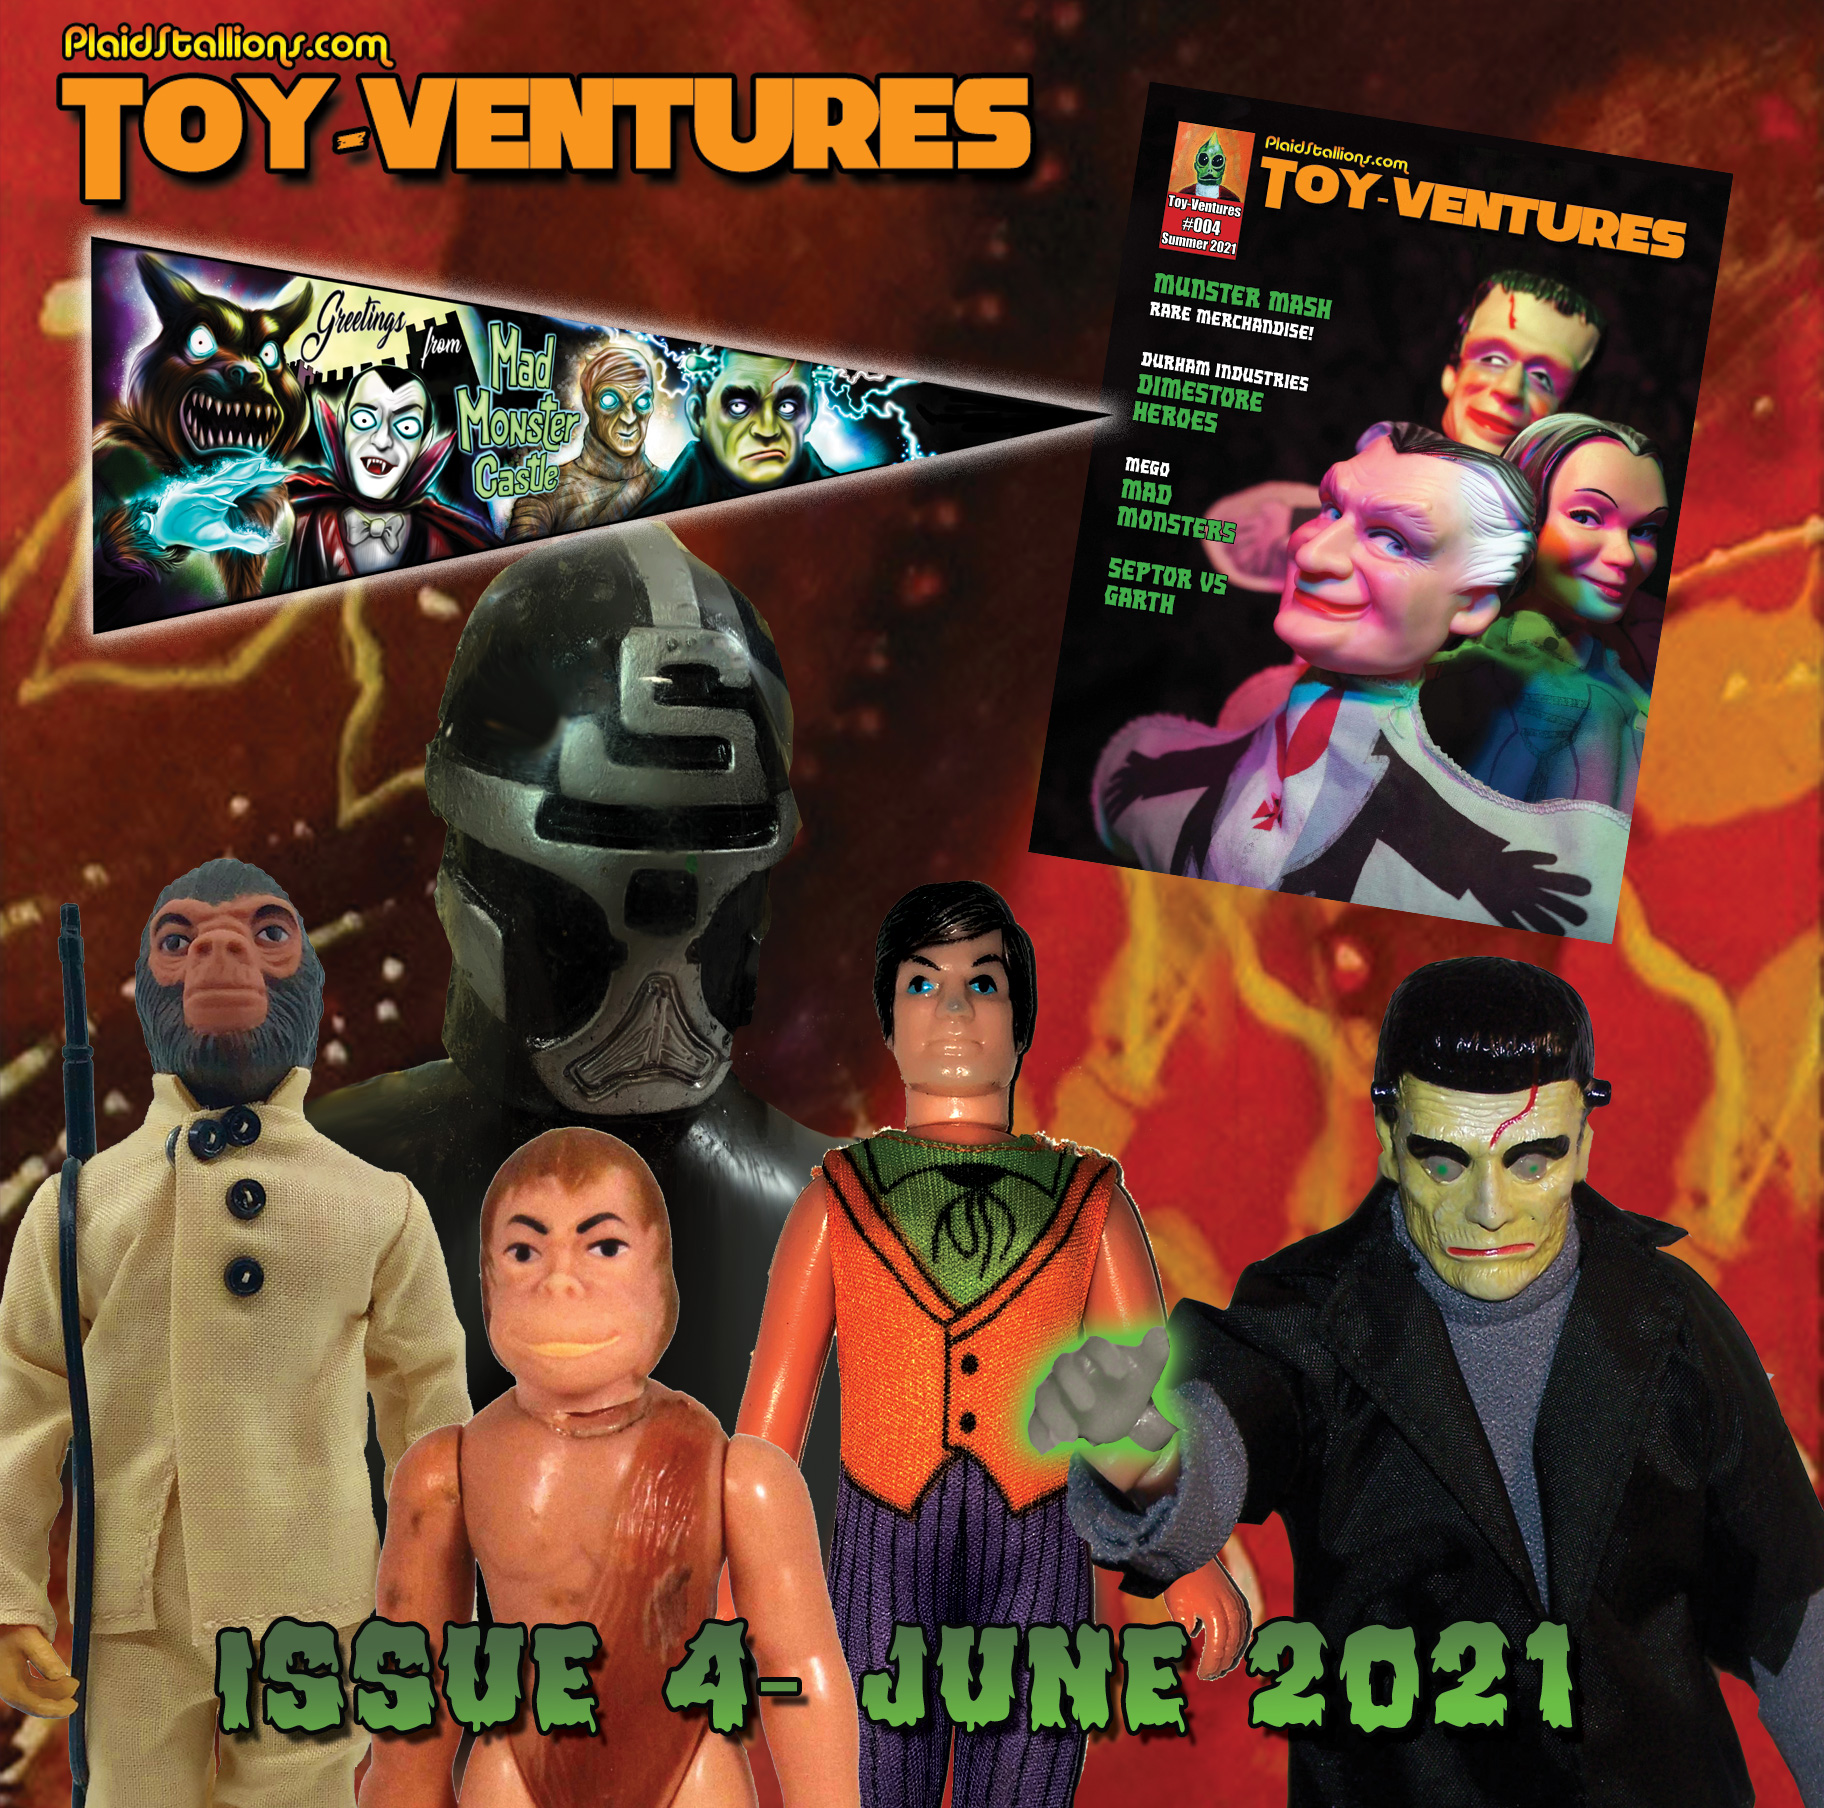 Toy-Ventures Magazine Issue 4 with Mego Monsters